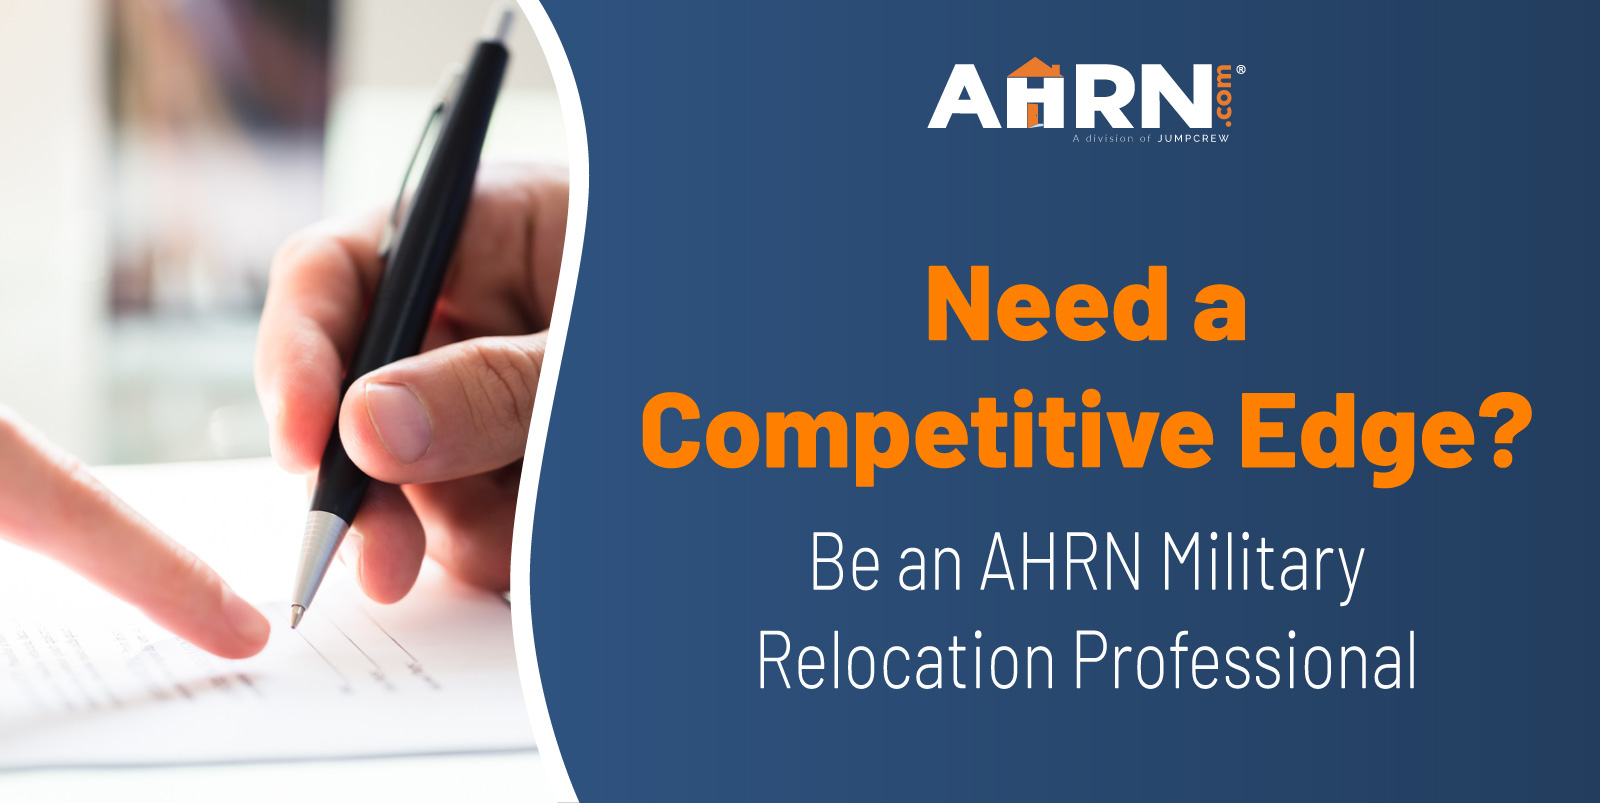 Need a Competitive Edge? Be an AHRN Military Relocation Professional